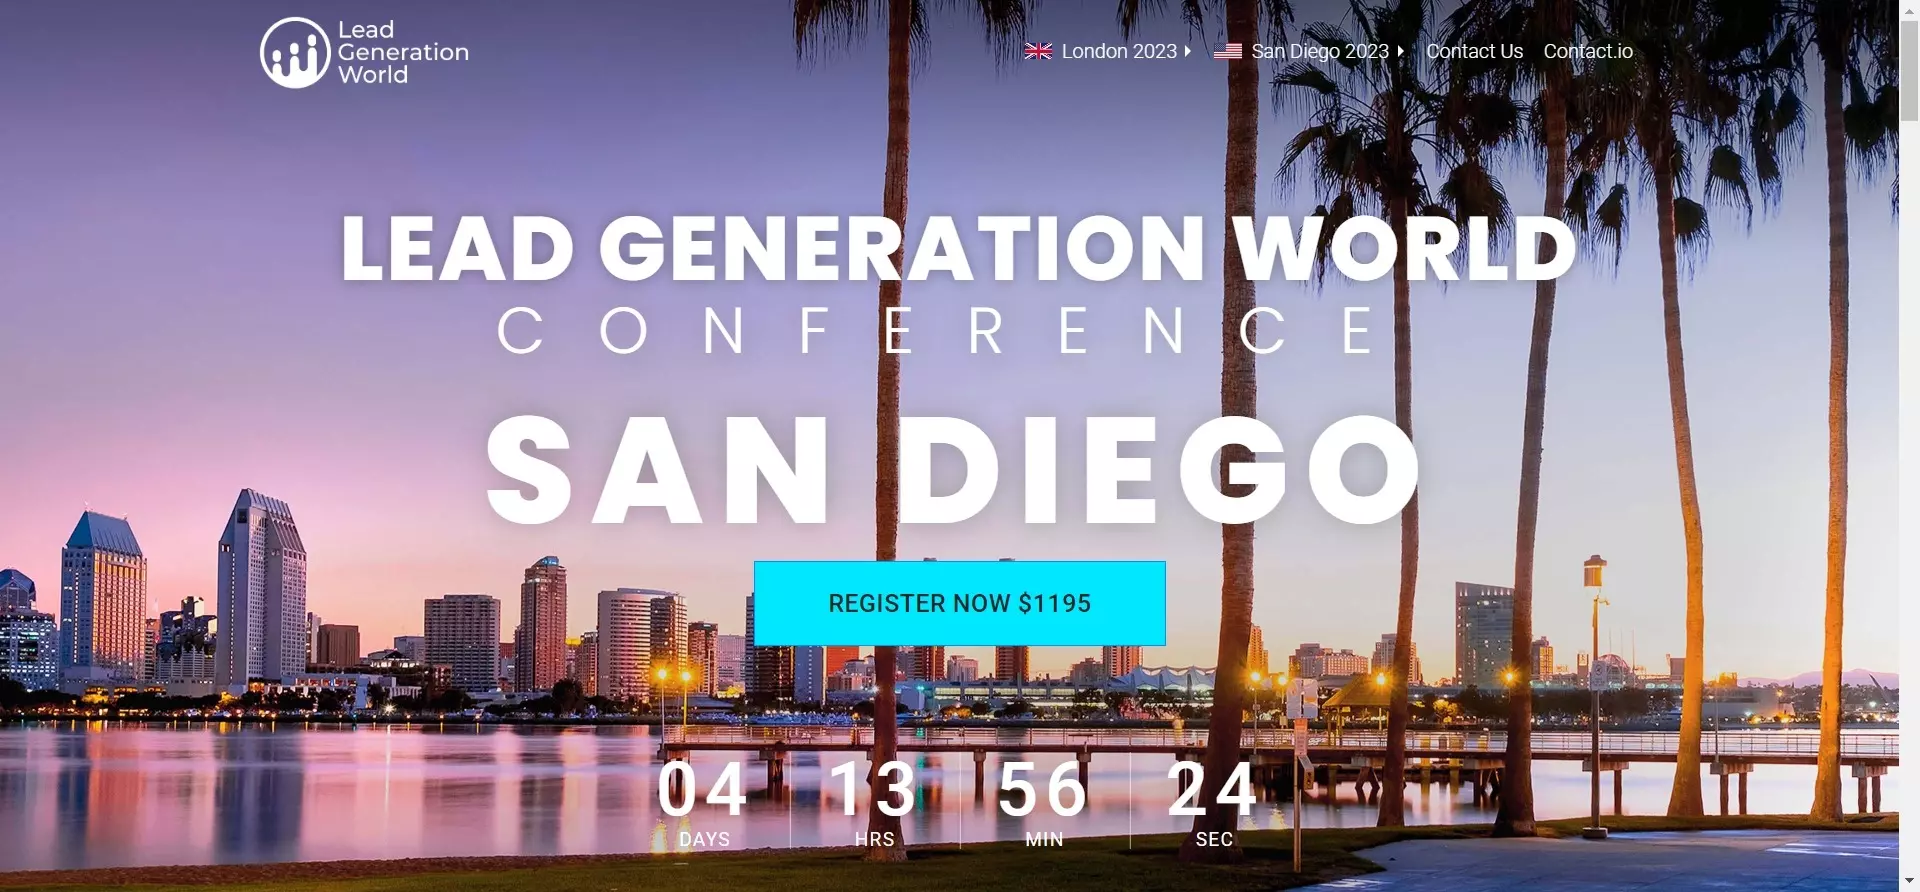 email marketing event LEAD GENERATION WORLD COMMITTEE SAN DIEGO